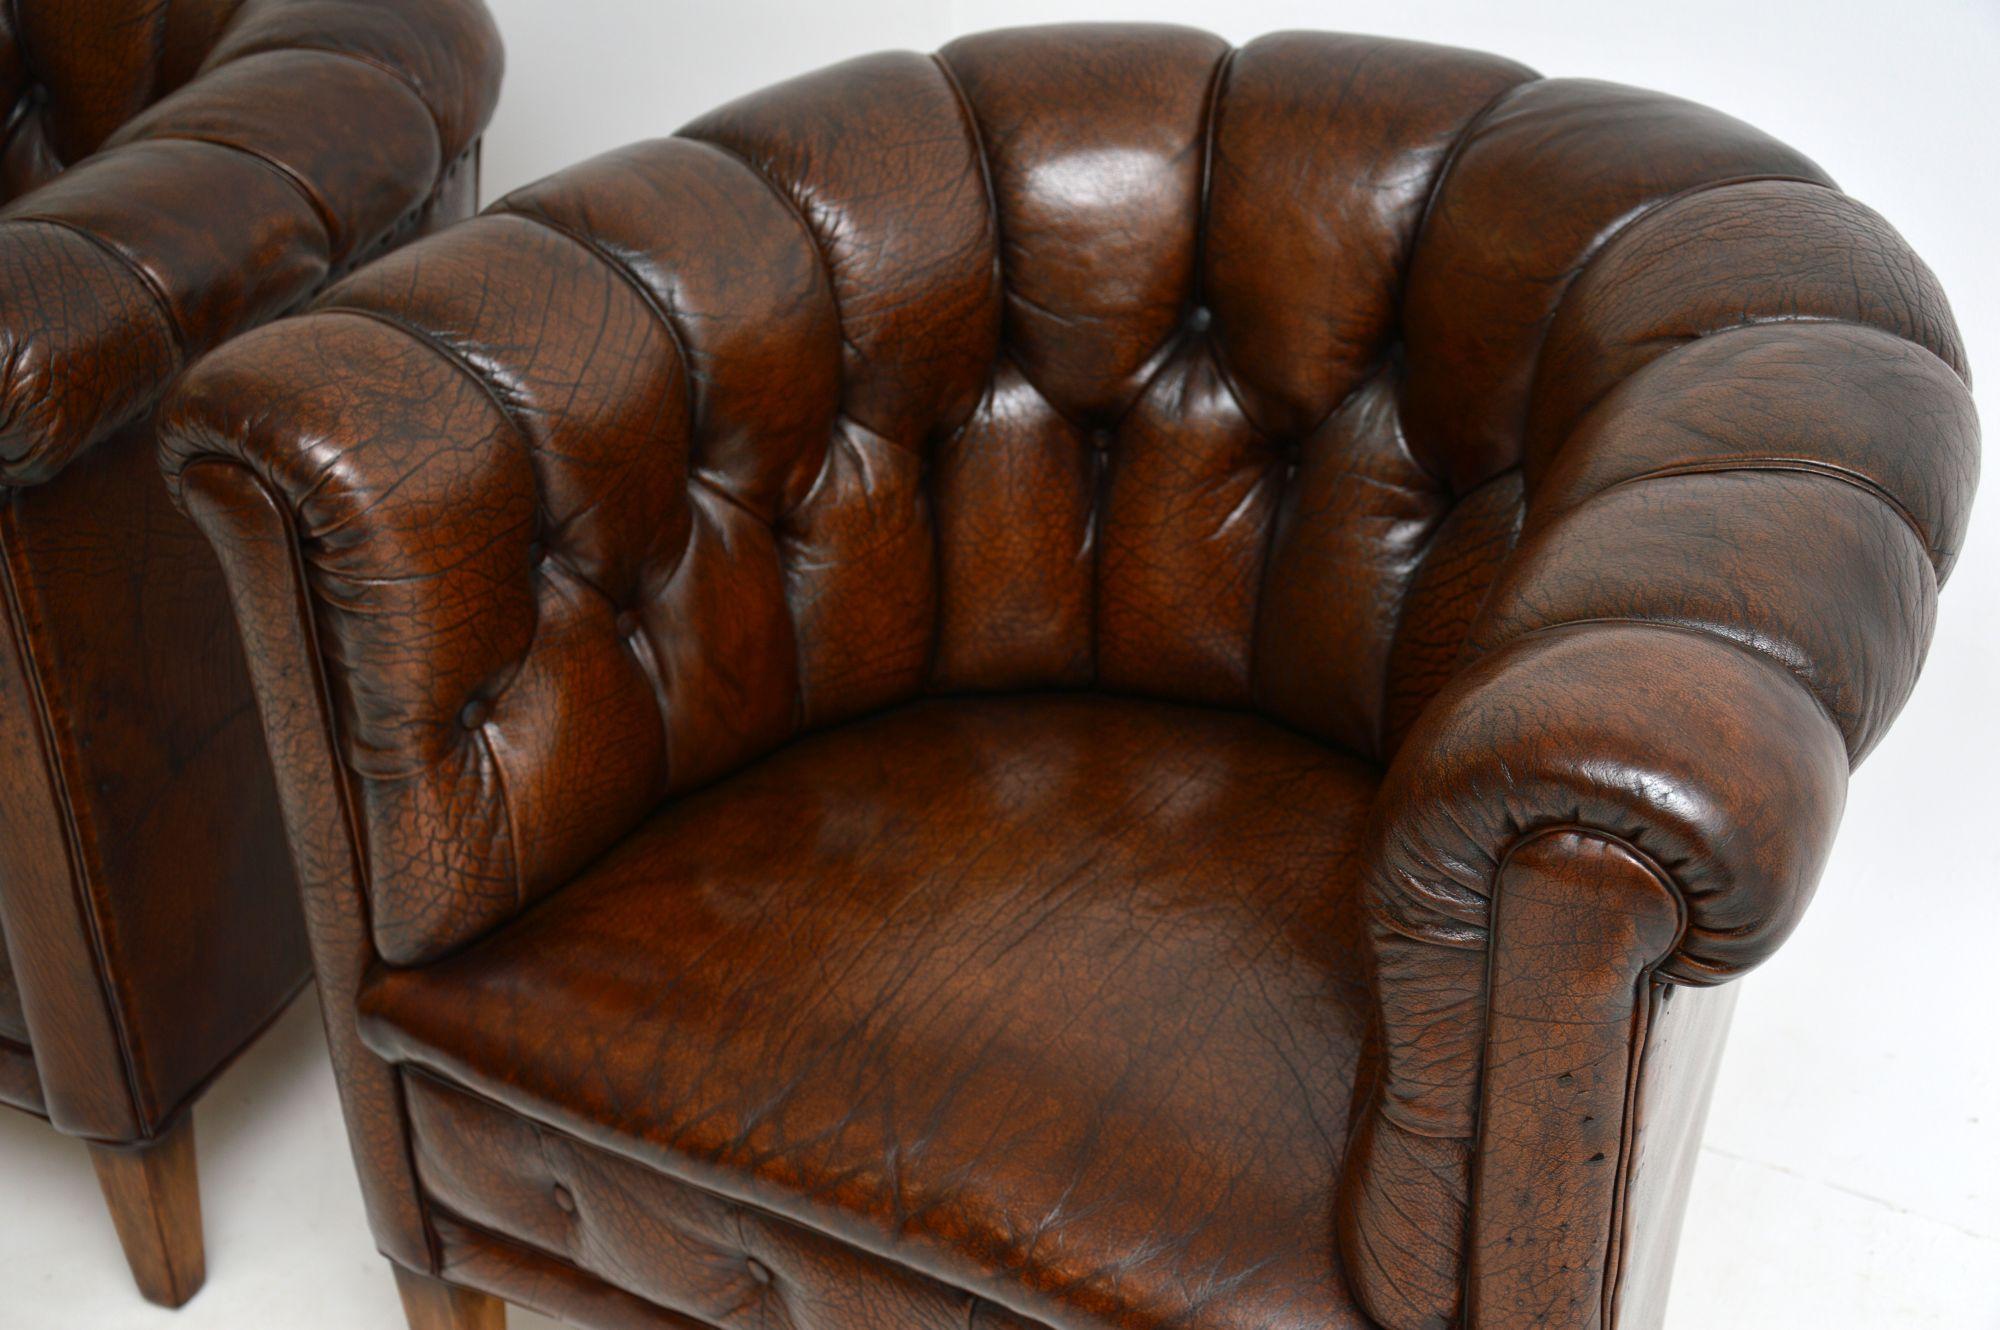 Pair of Antique Swedish Leather Chesterfield Armchairs 1